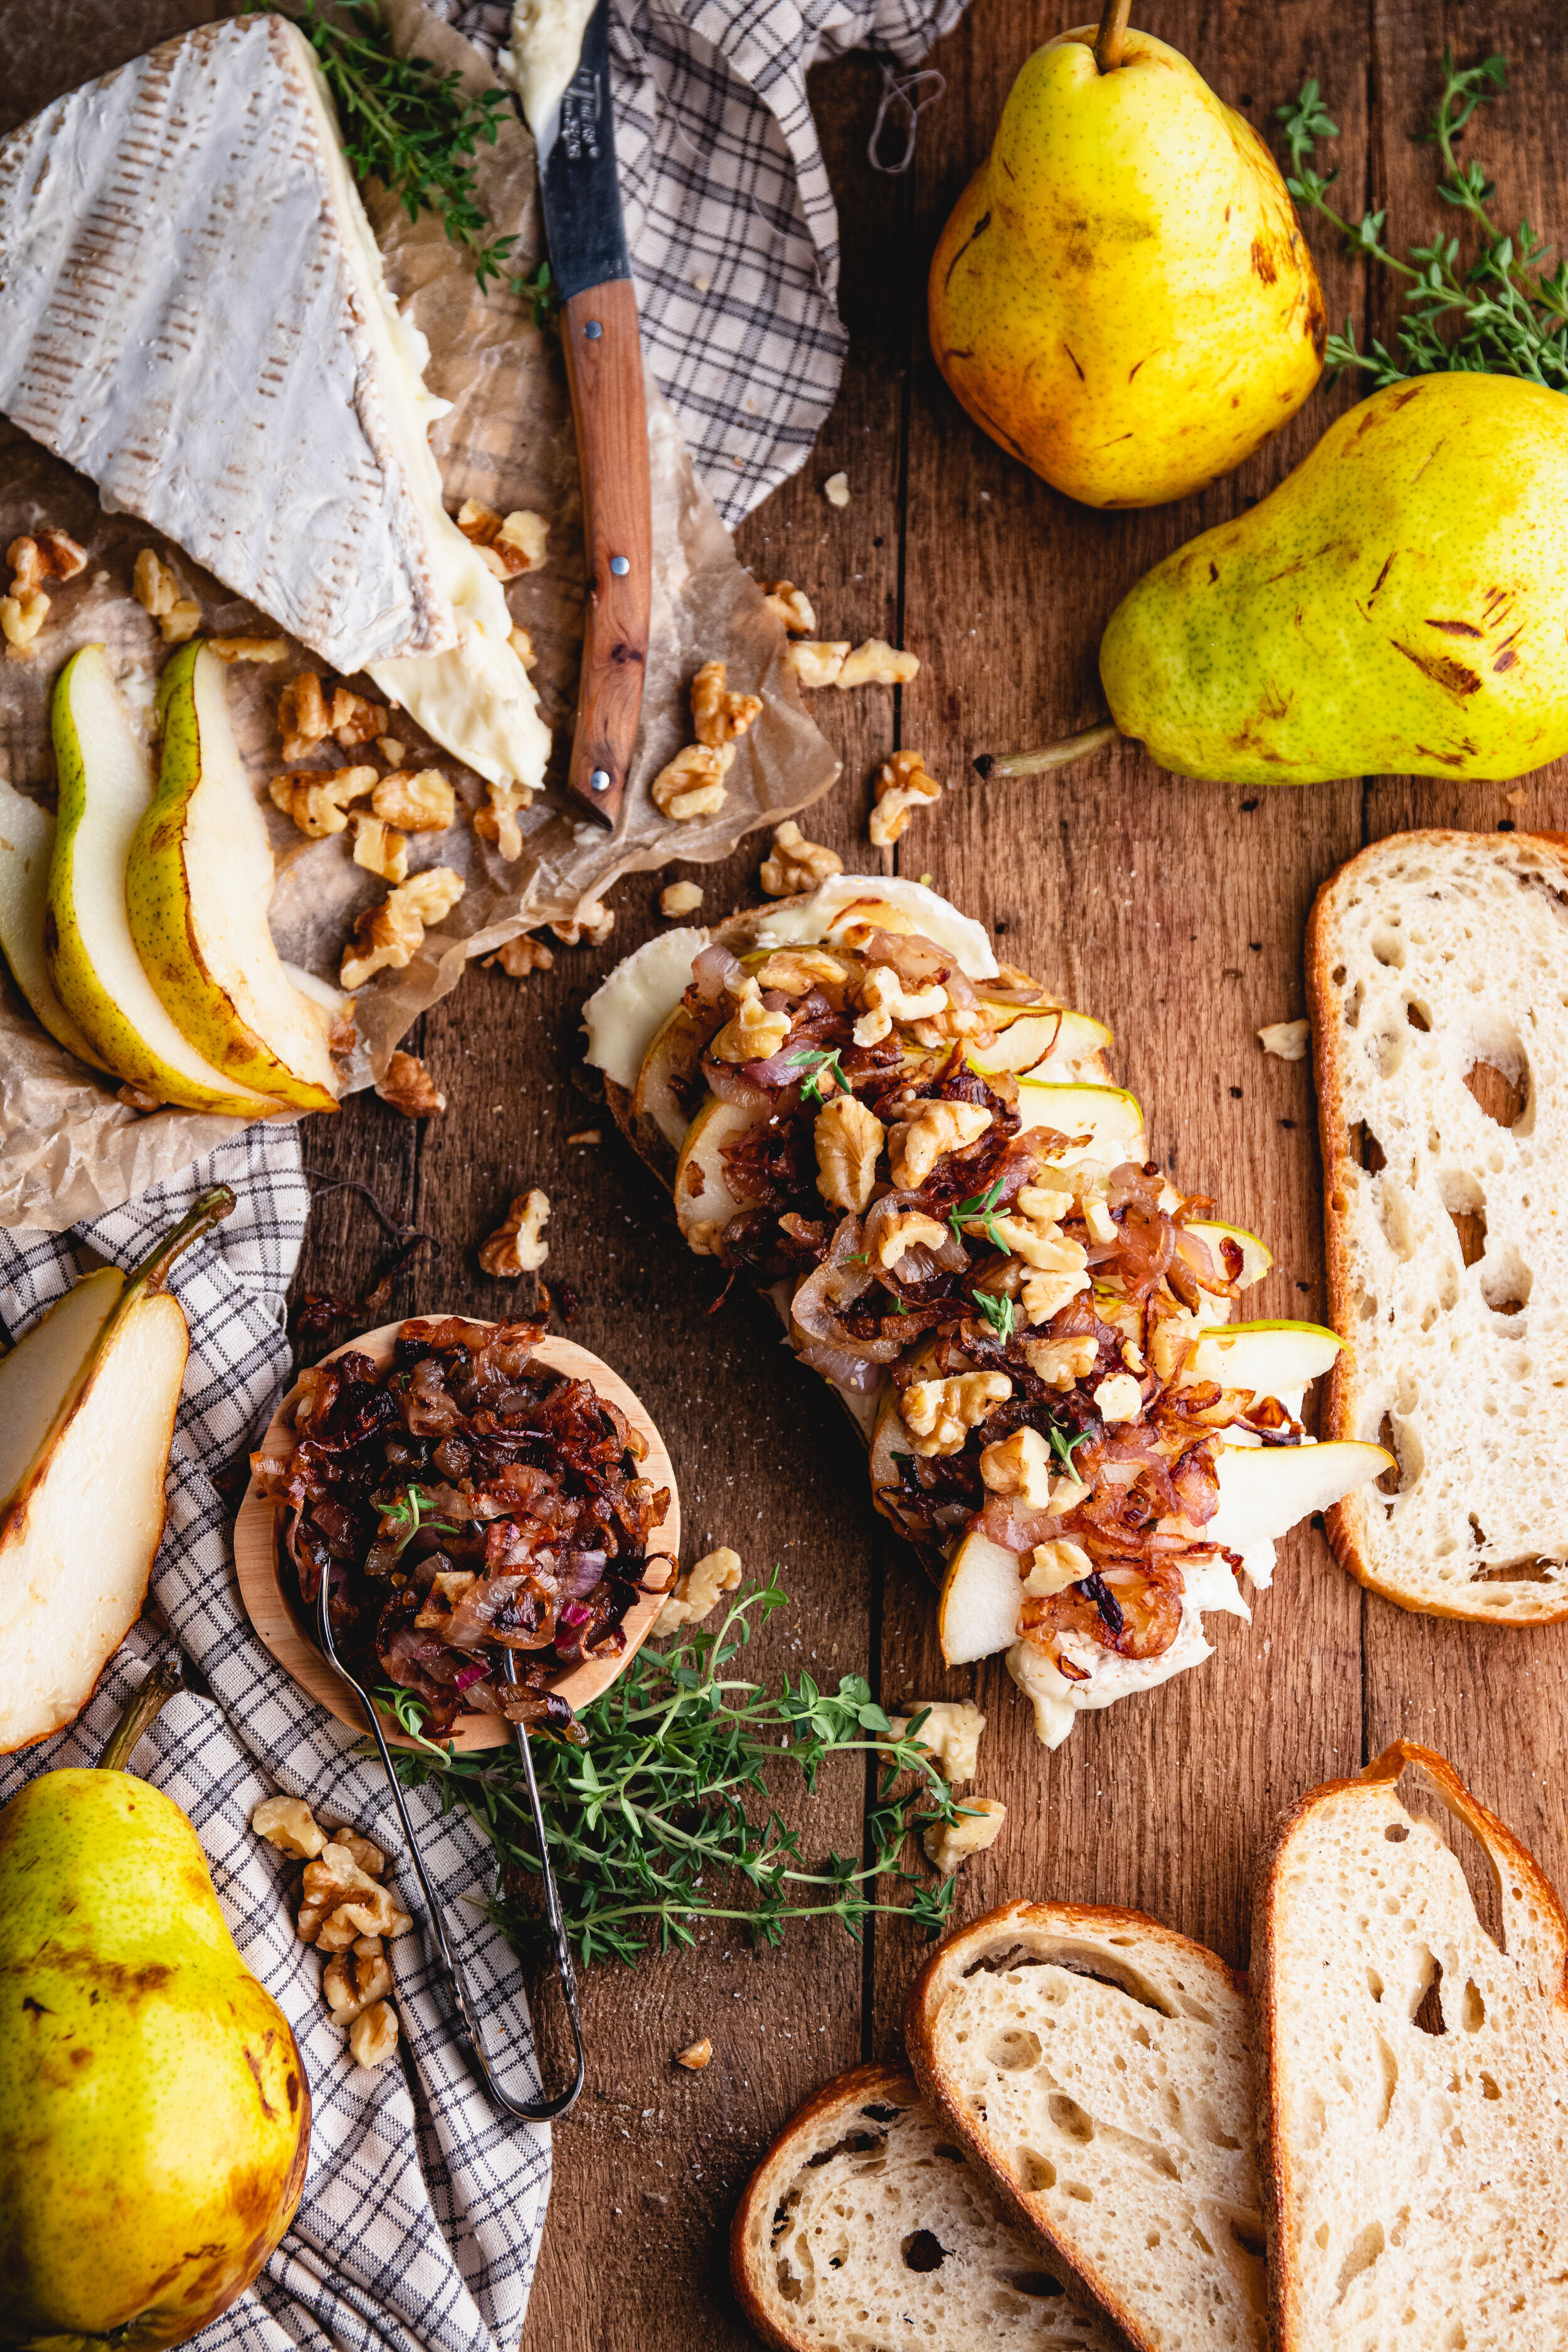 Pear and Brie Panini with Caramelized Shallots and Walnuts